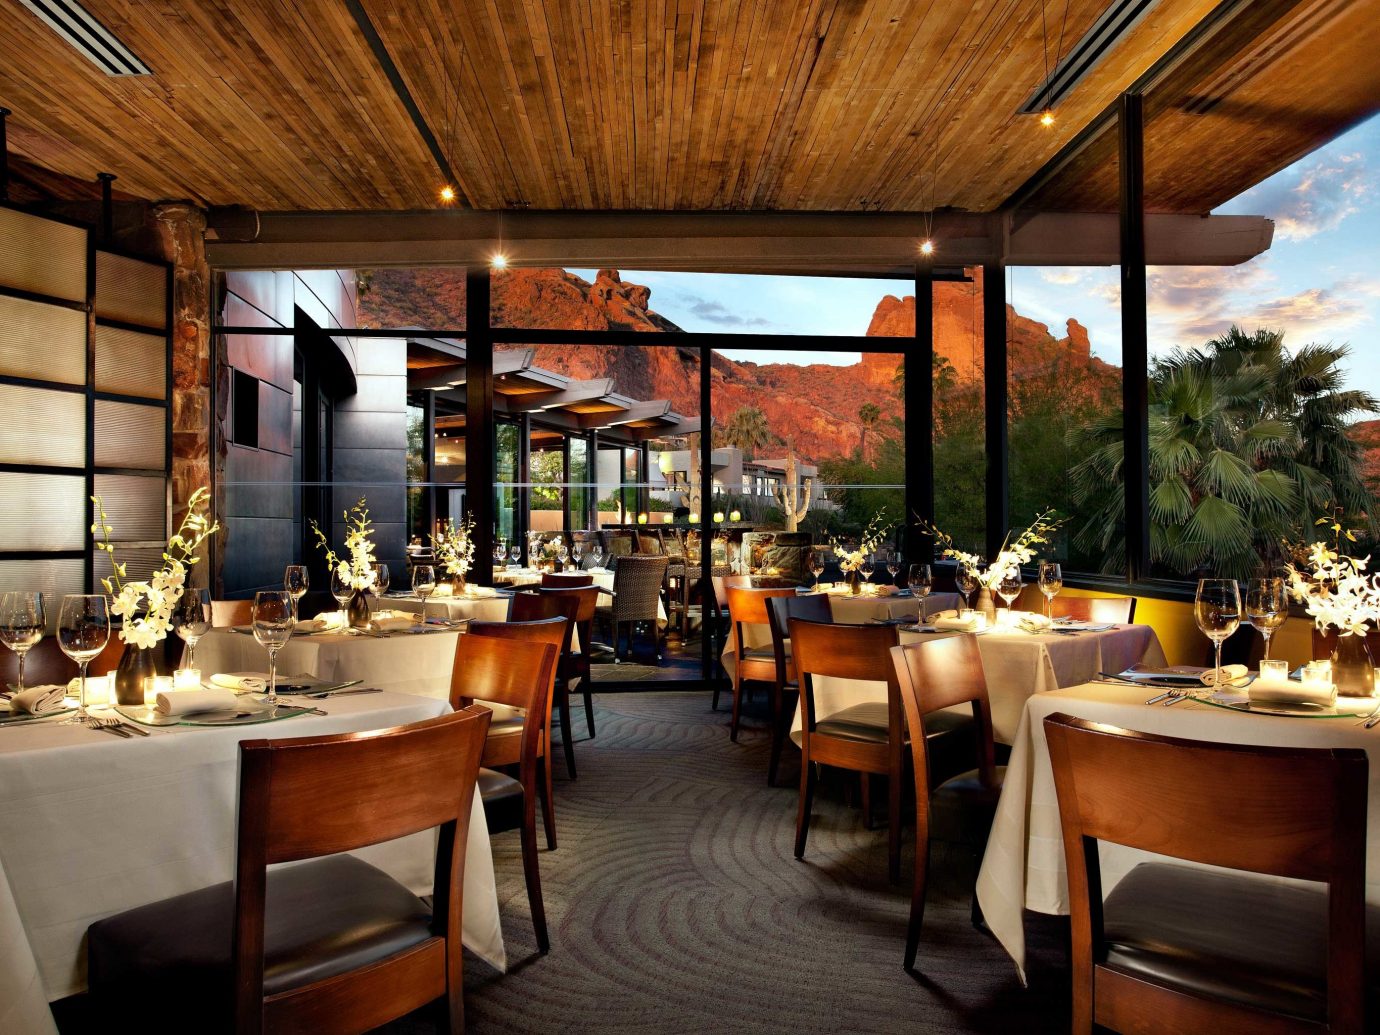 Restaurant at Sanctuary on Camelback Mountain Resort and Spa.